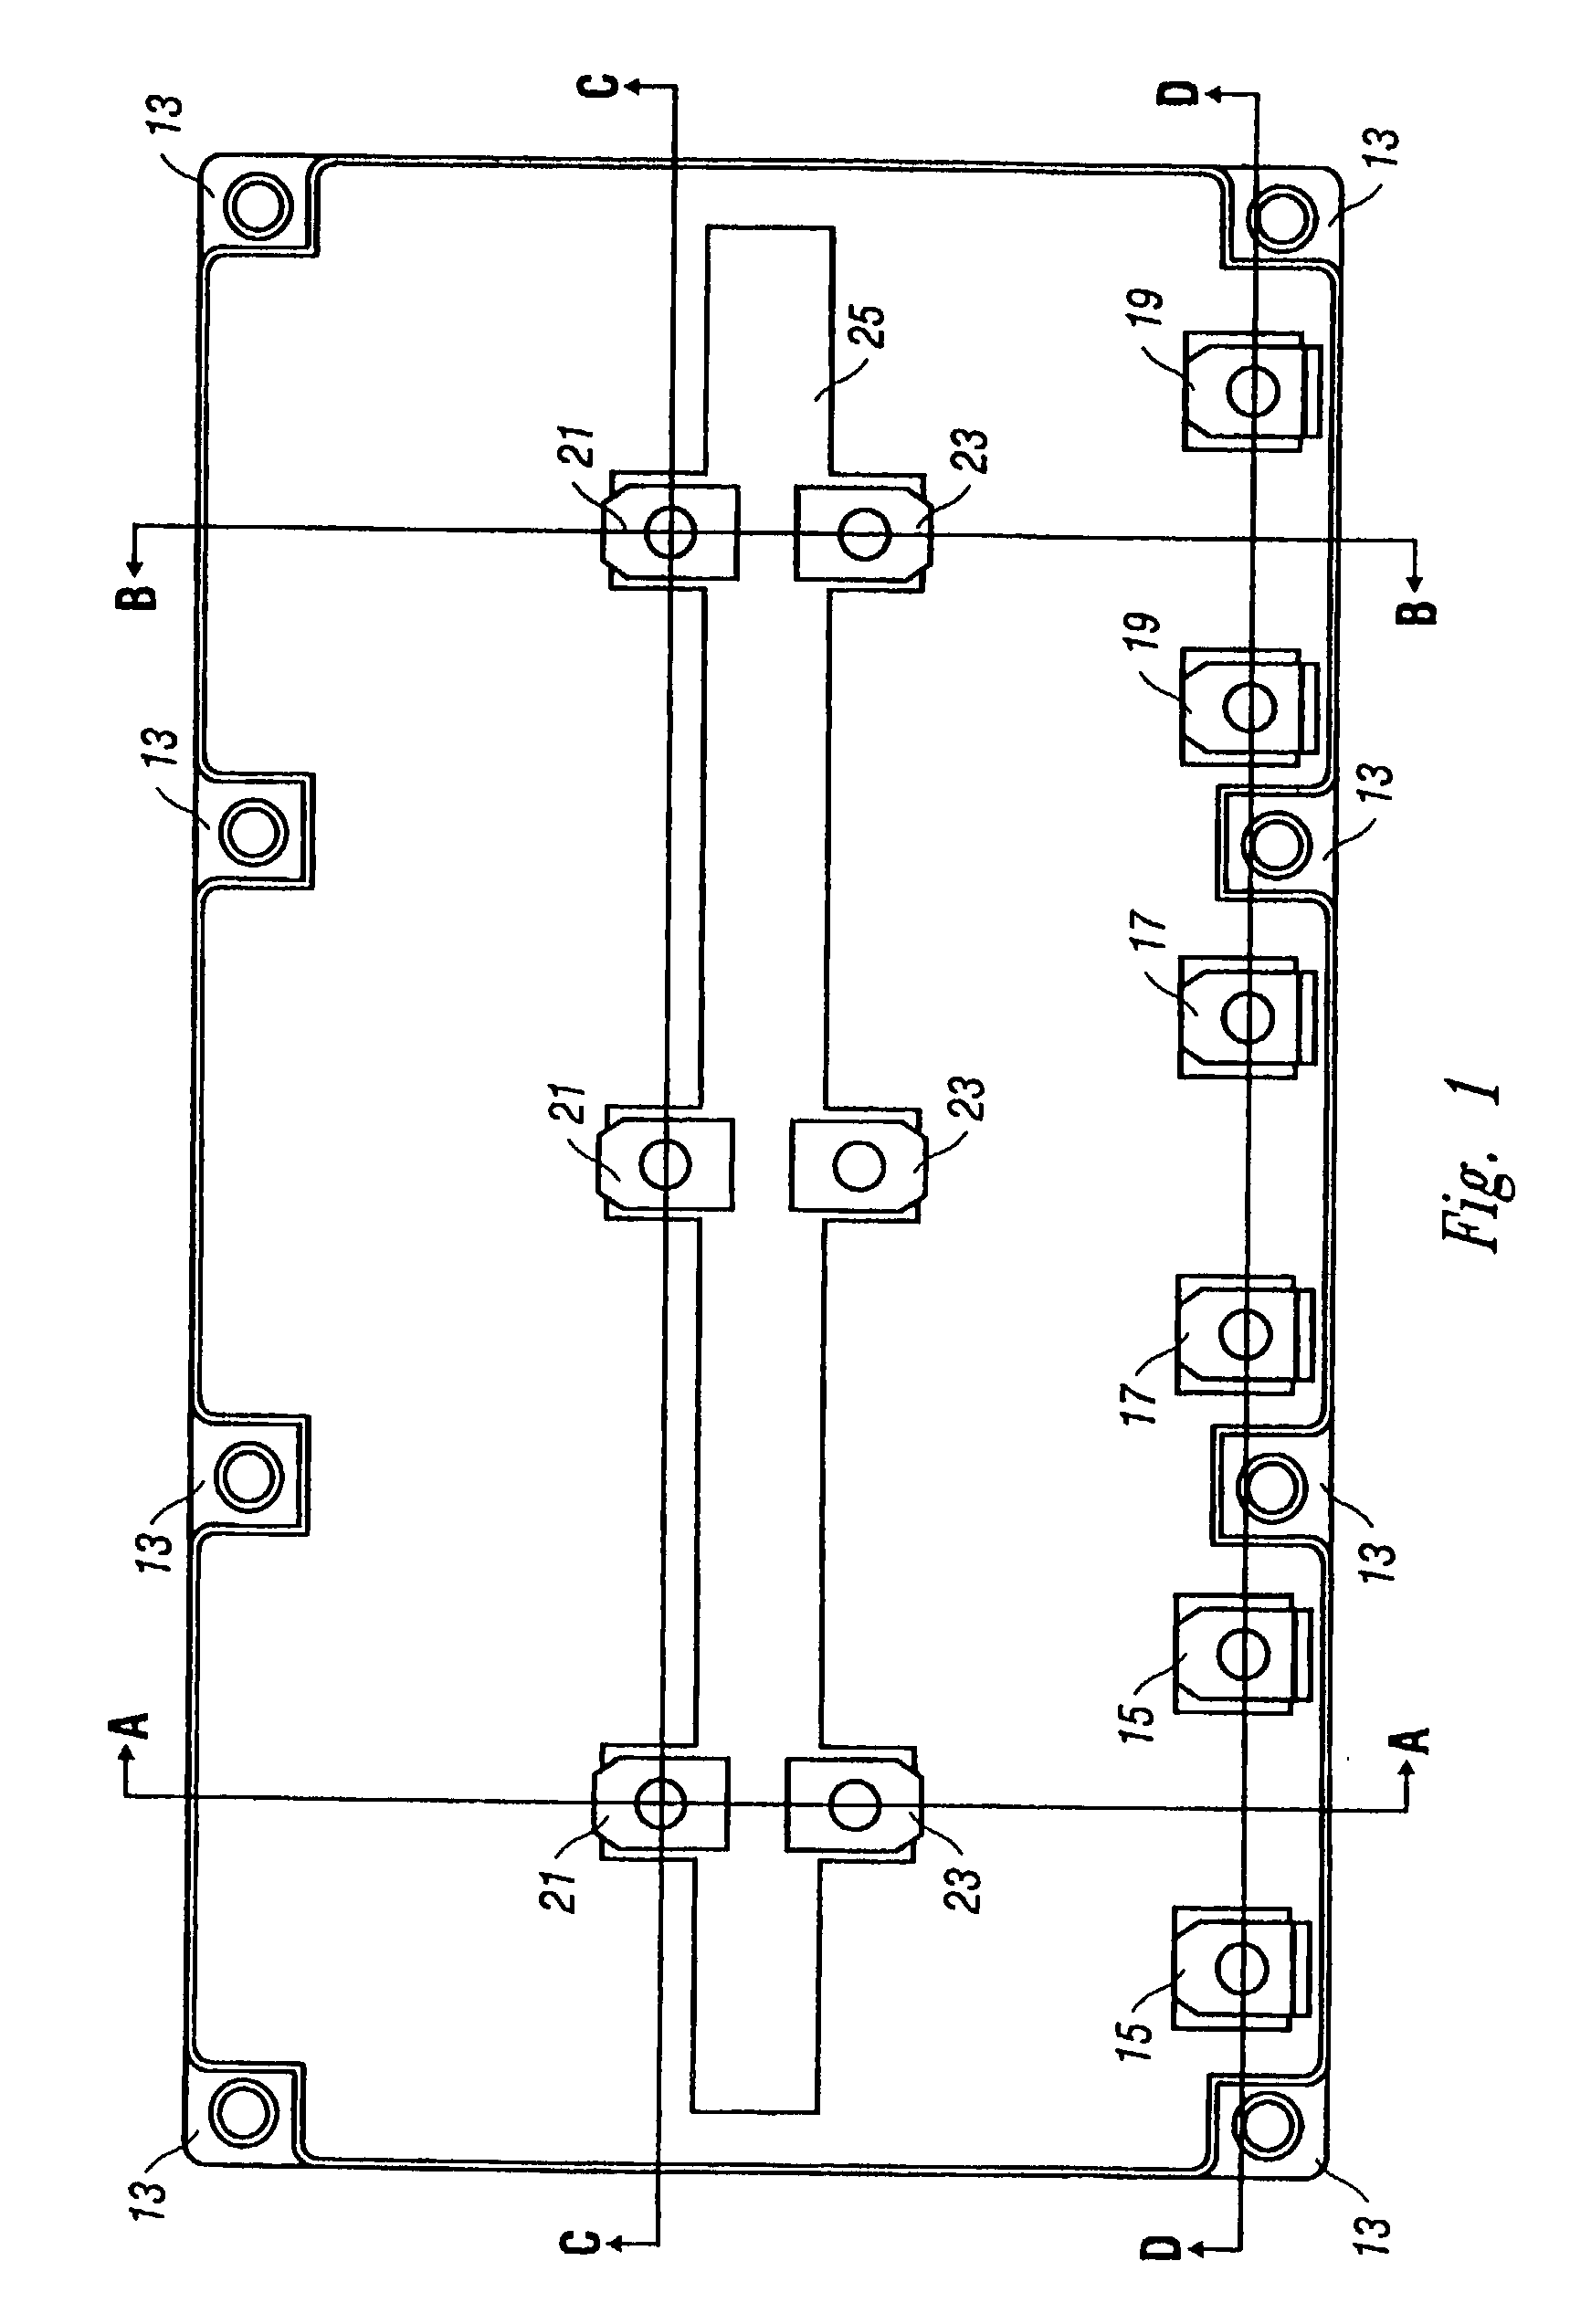 Leadframe-based module DC bus design to reduce module inductance